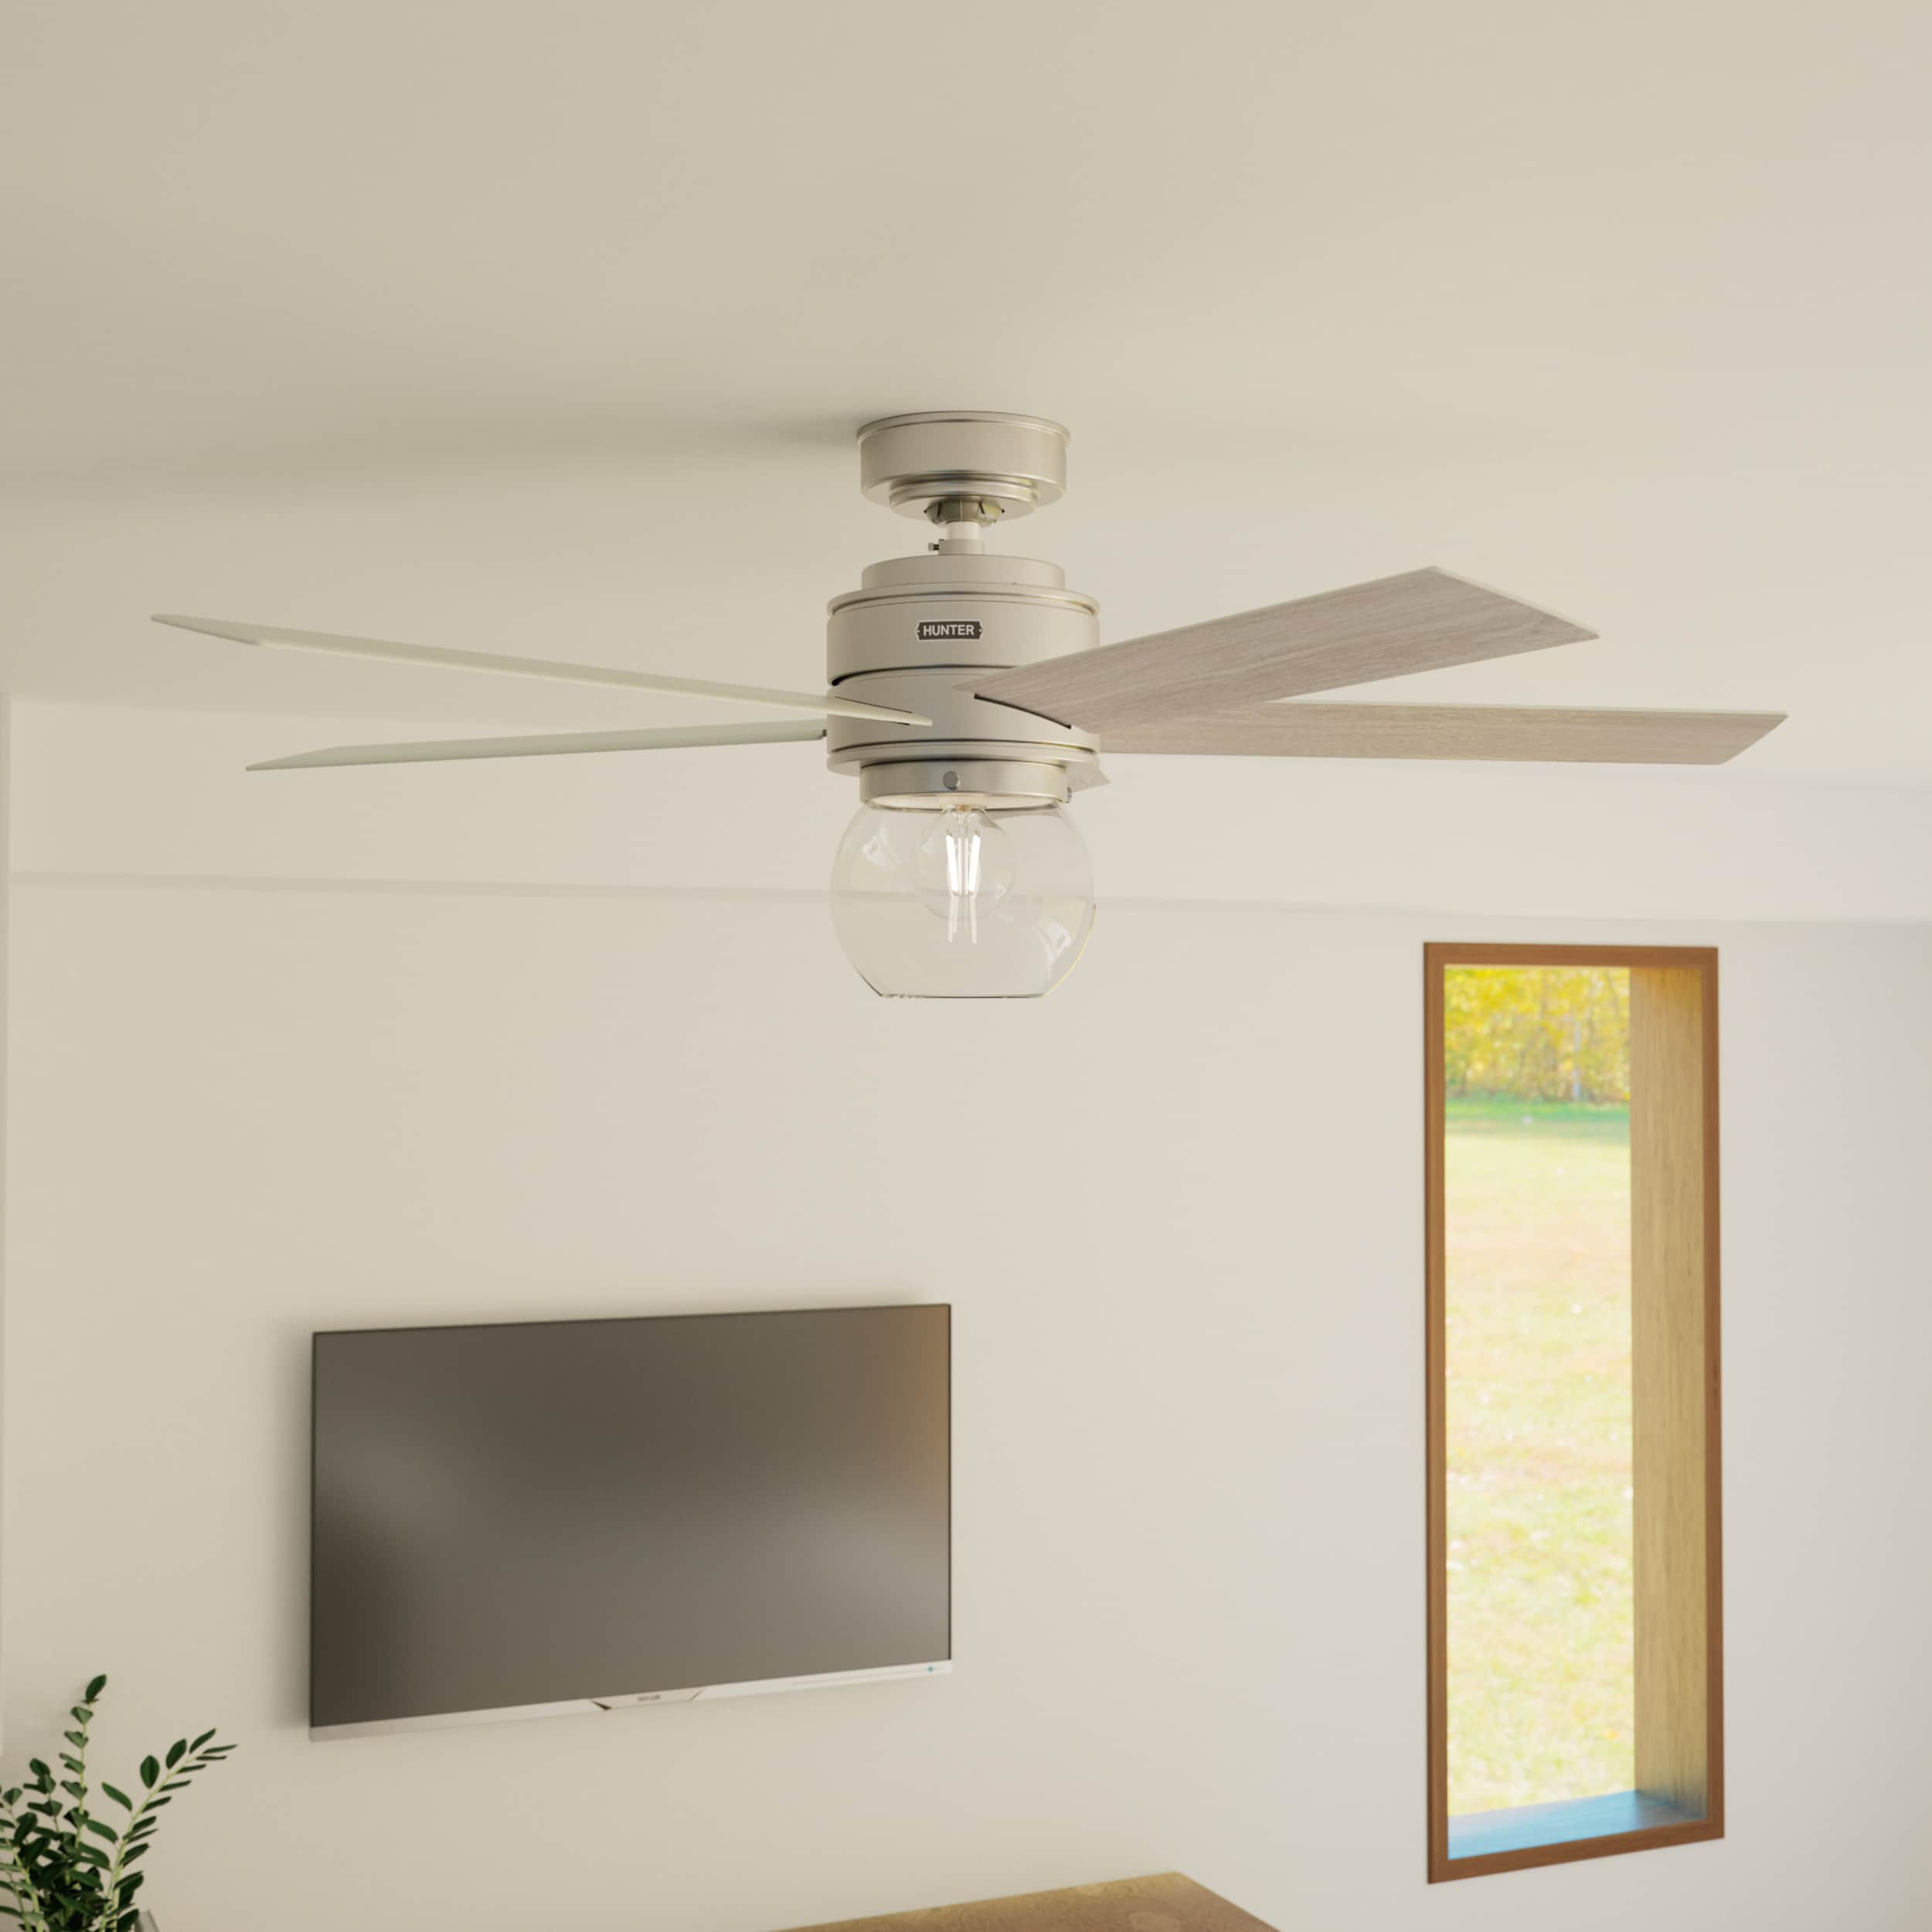 Hunter Xidane SureSpeed 52-in Brushed Nickel Indoor Ceiling Fan with Light  and Remote (5-Blade)